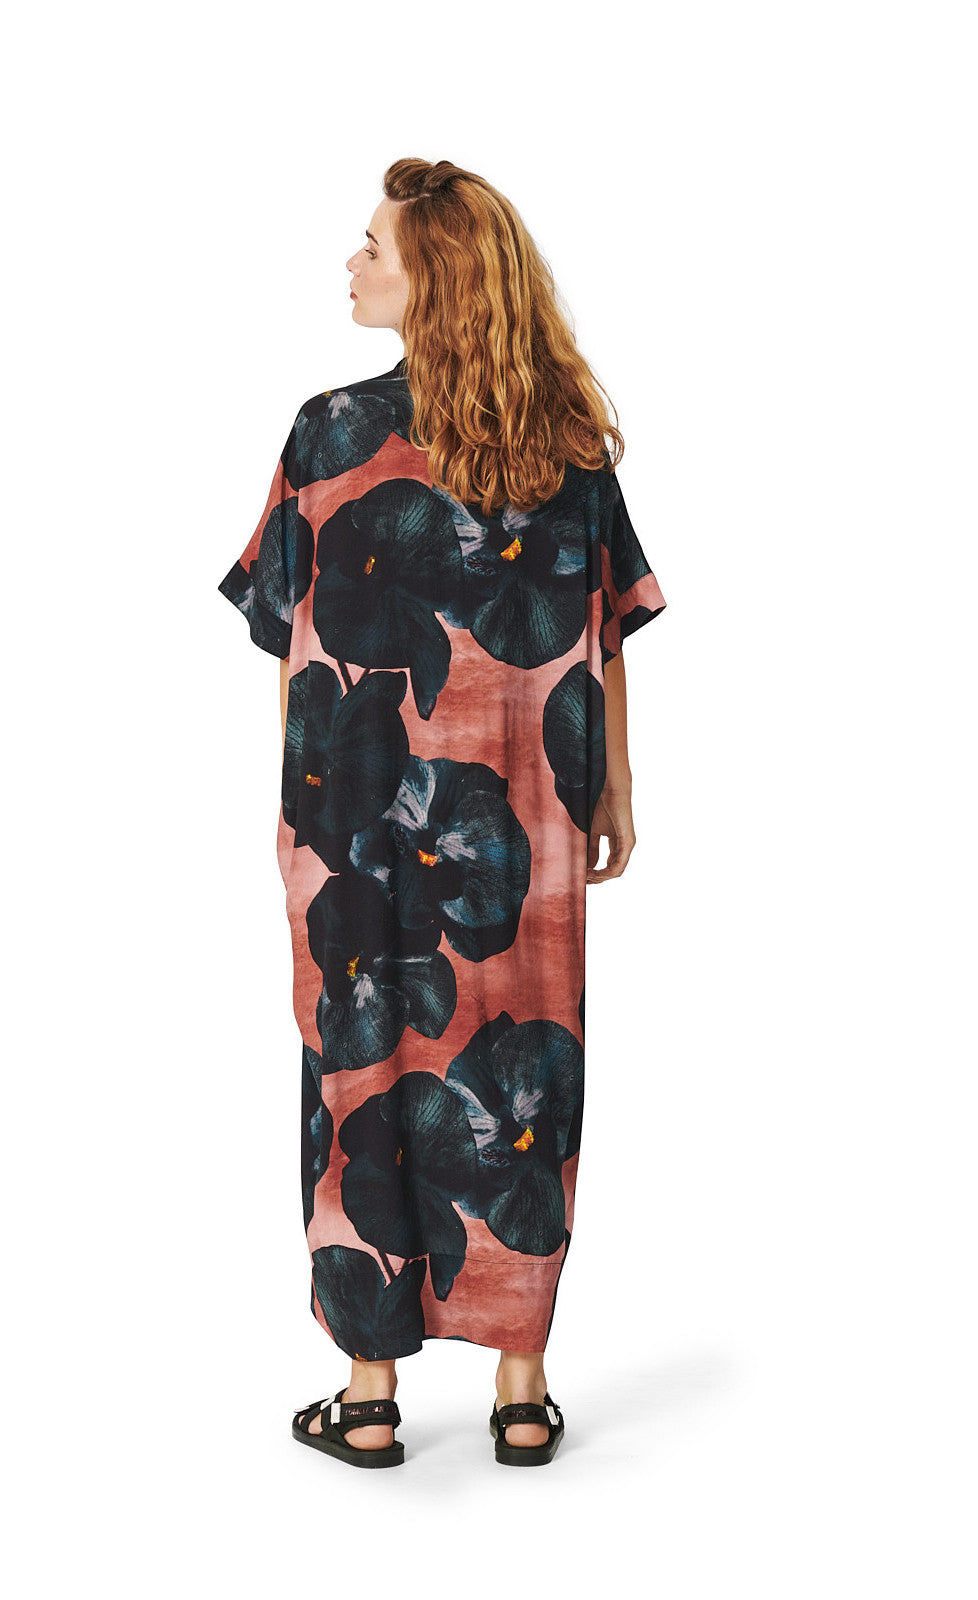 Back full body view of a woman wearing the bitte kai rand black hibiscus long dress. This dress is pink with large black hibiscus flowers all over it. The dress has elbow-length sleeves, a v-neck, and a hem that sits at the ankles.